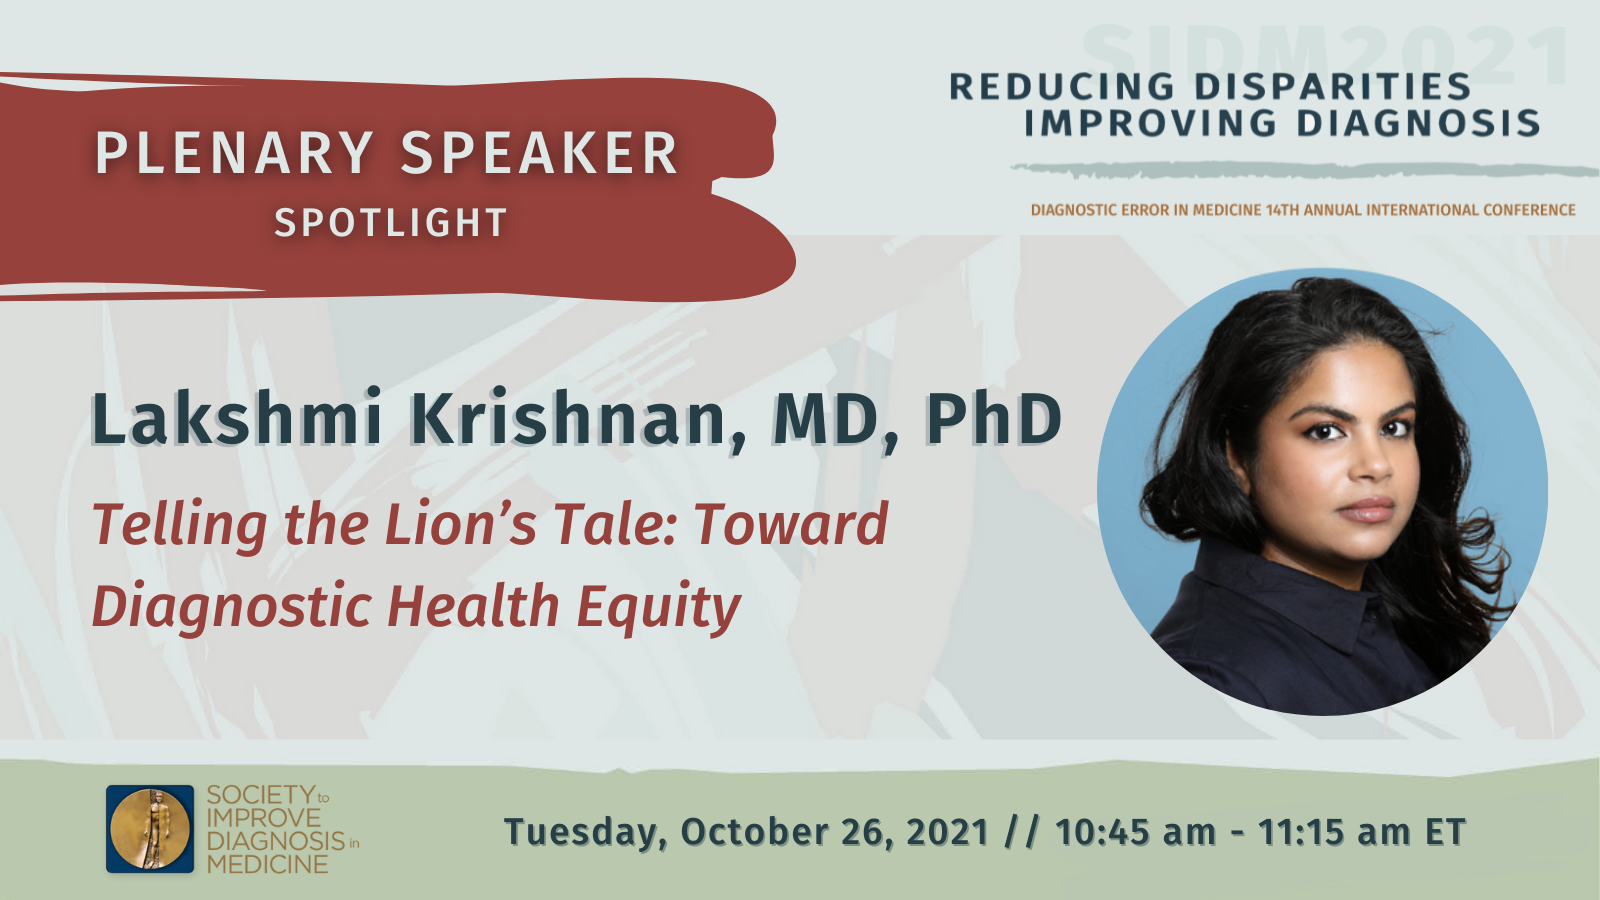 Banner for "The Society to Improve Diagnosis in Medicine" session with Dr. Lakshmi Krishnan